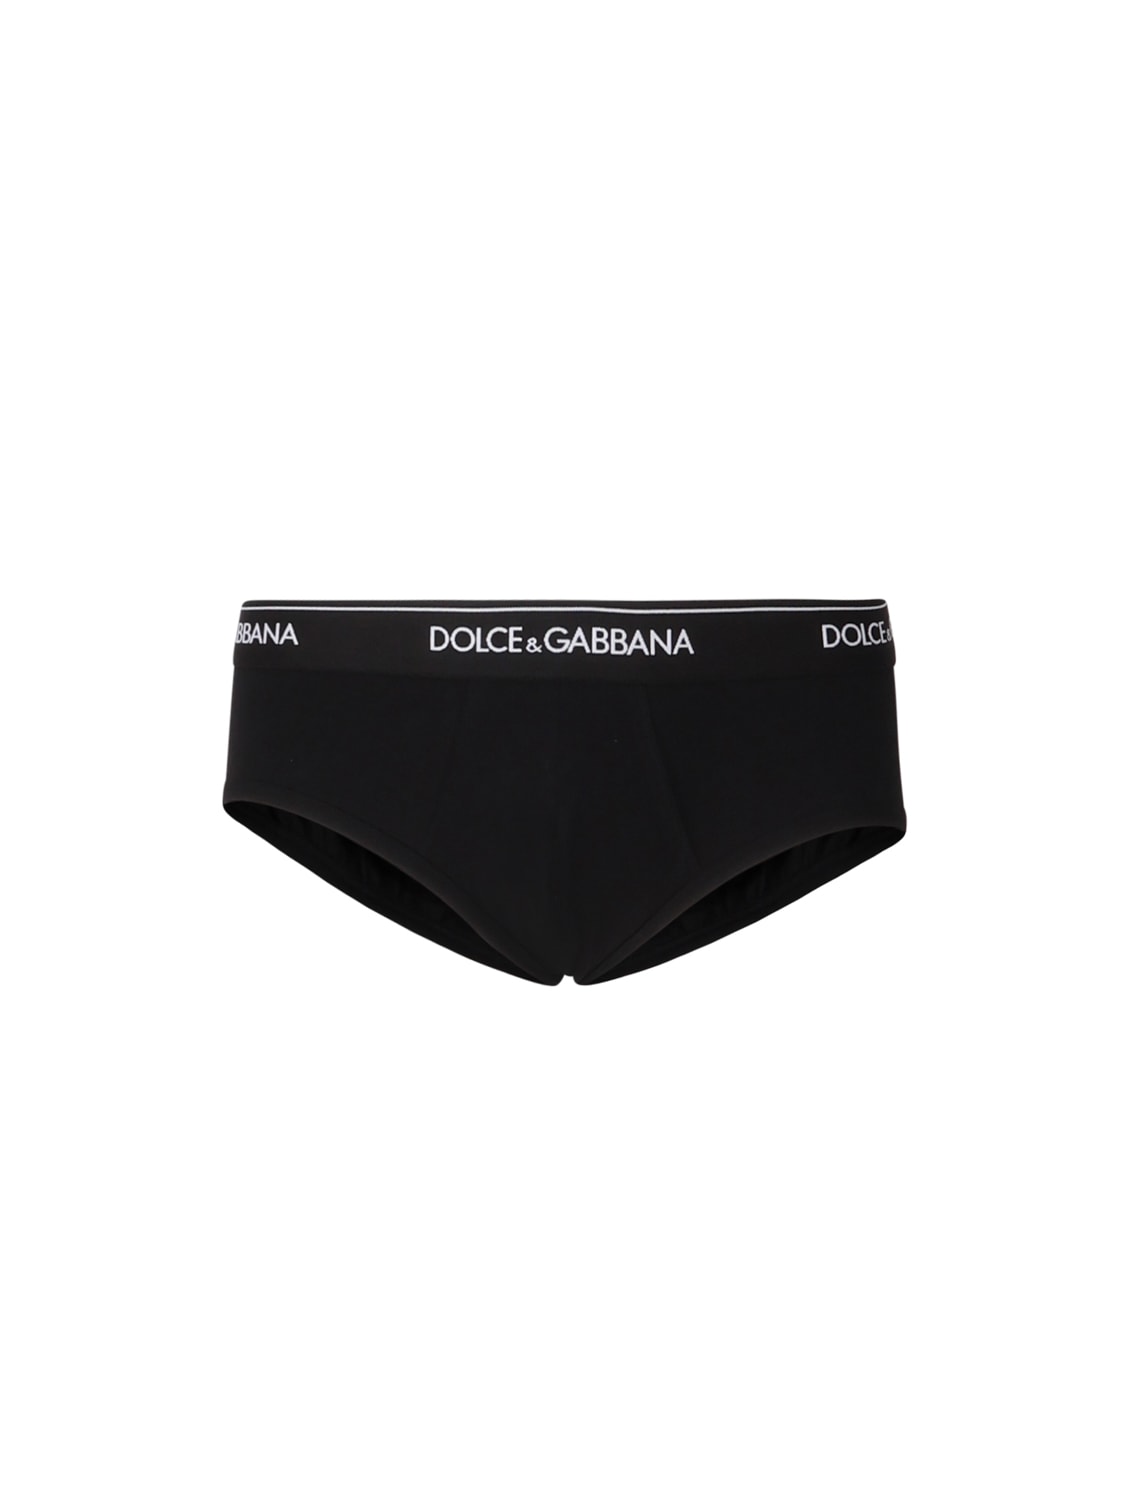 Dolce & Gabbana Pack Containing Two Brando Briefs Of The Same Color In Black